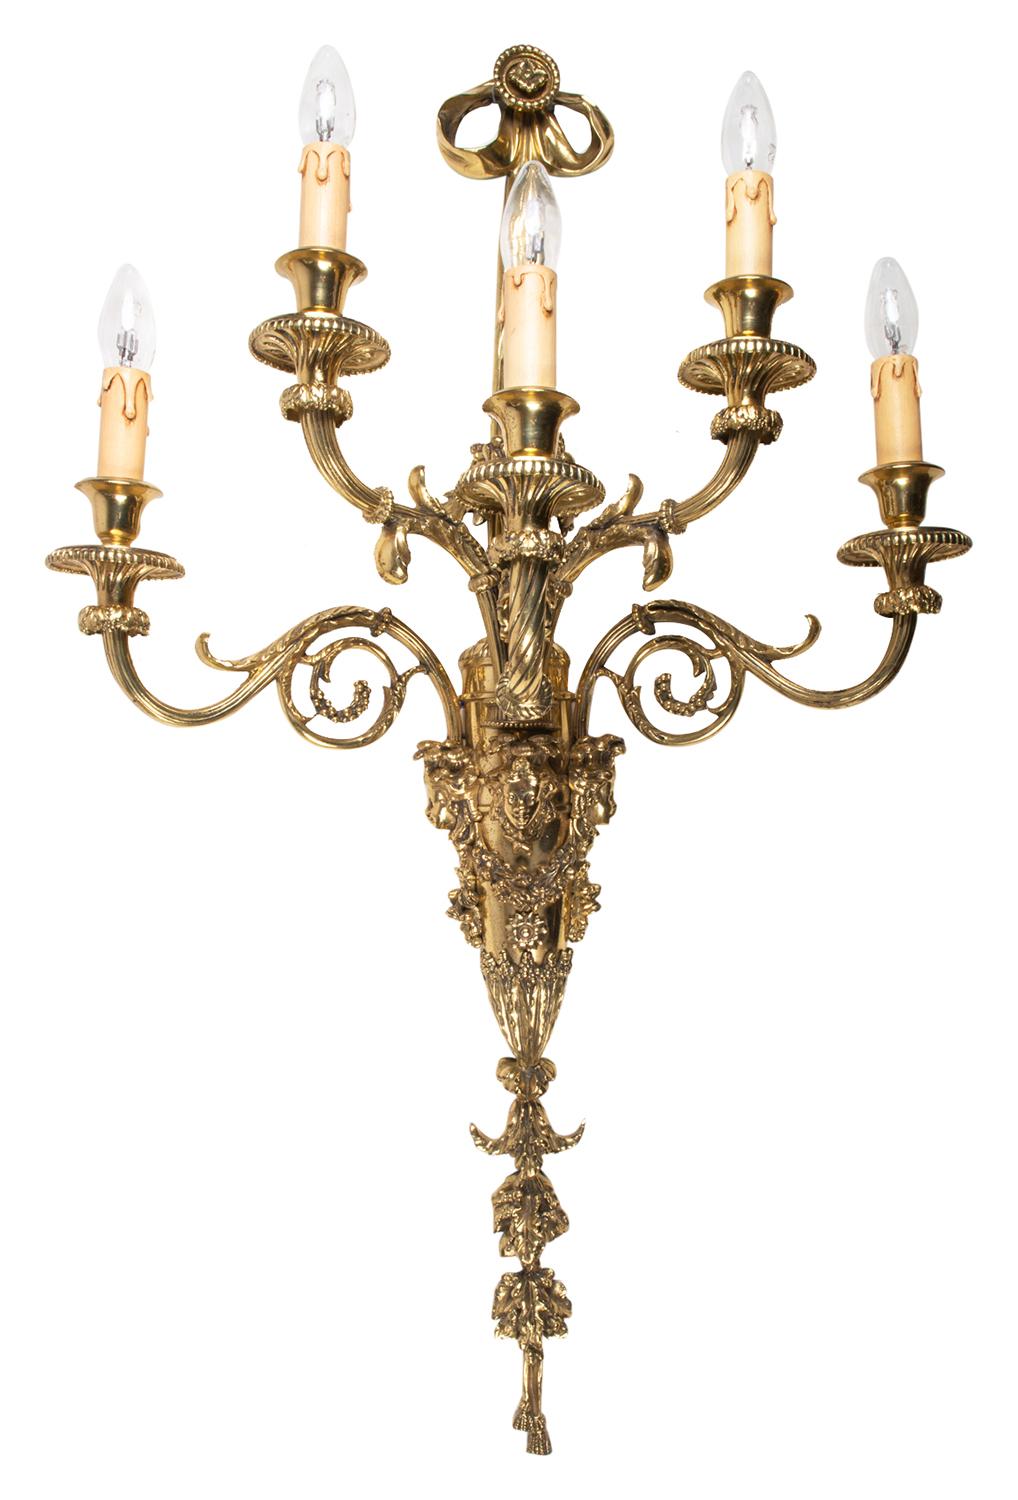 A large pair of classical 19th century French gilded ormolu wall lights / sconces, each with five branches, scrolling foliate, mask and ribbon decoration.